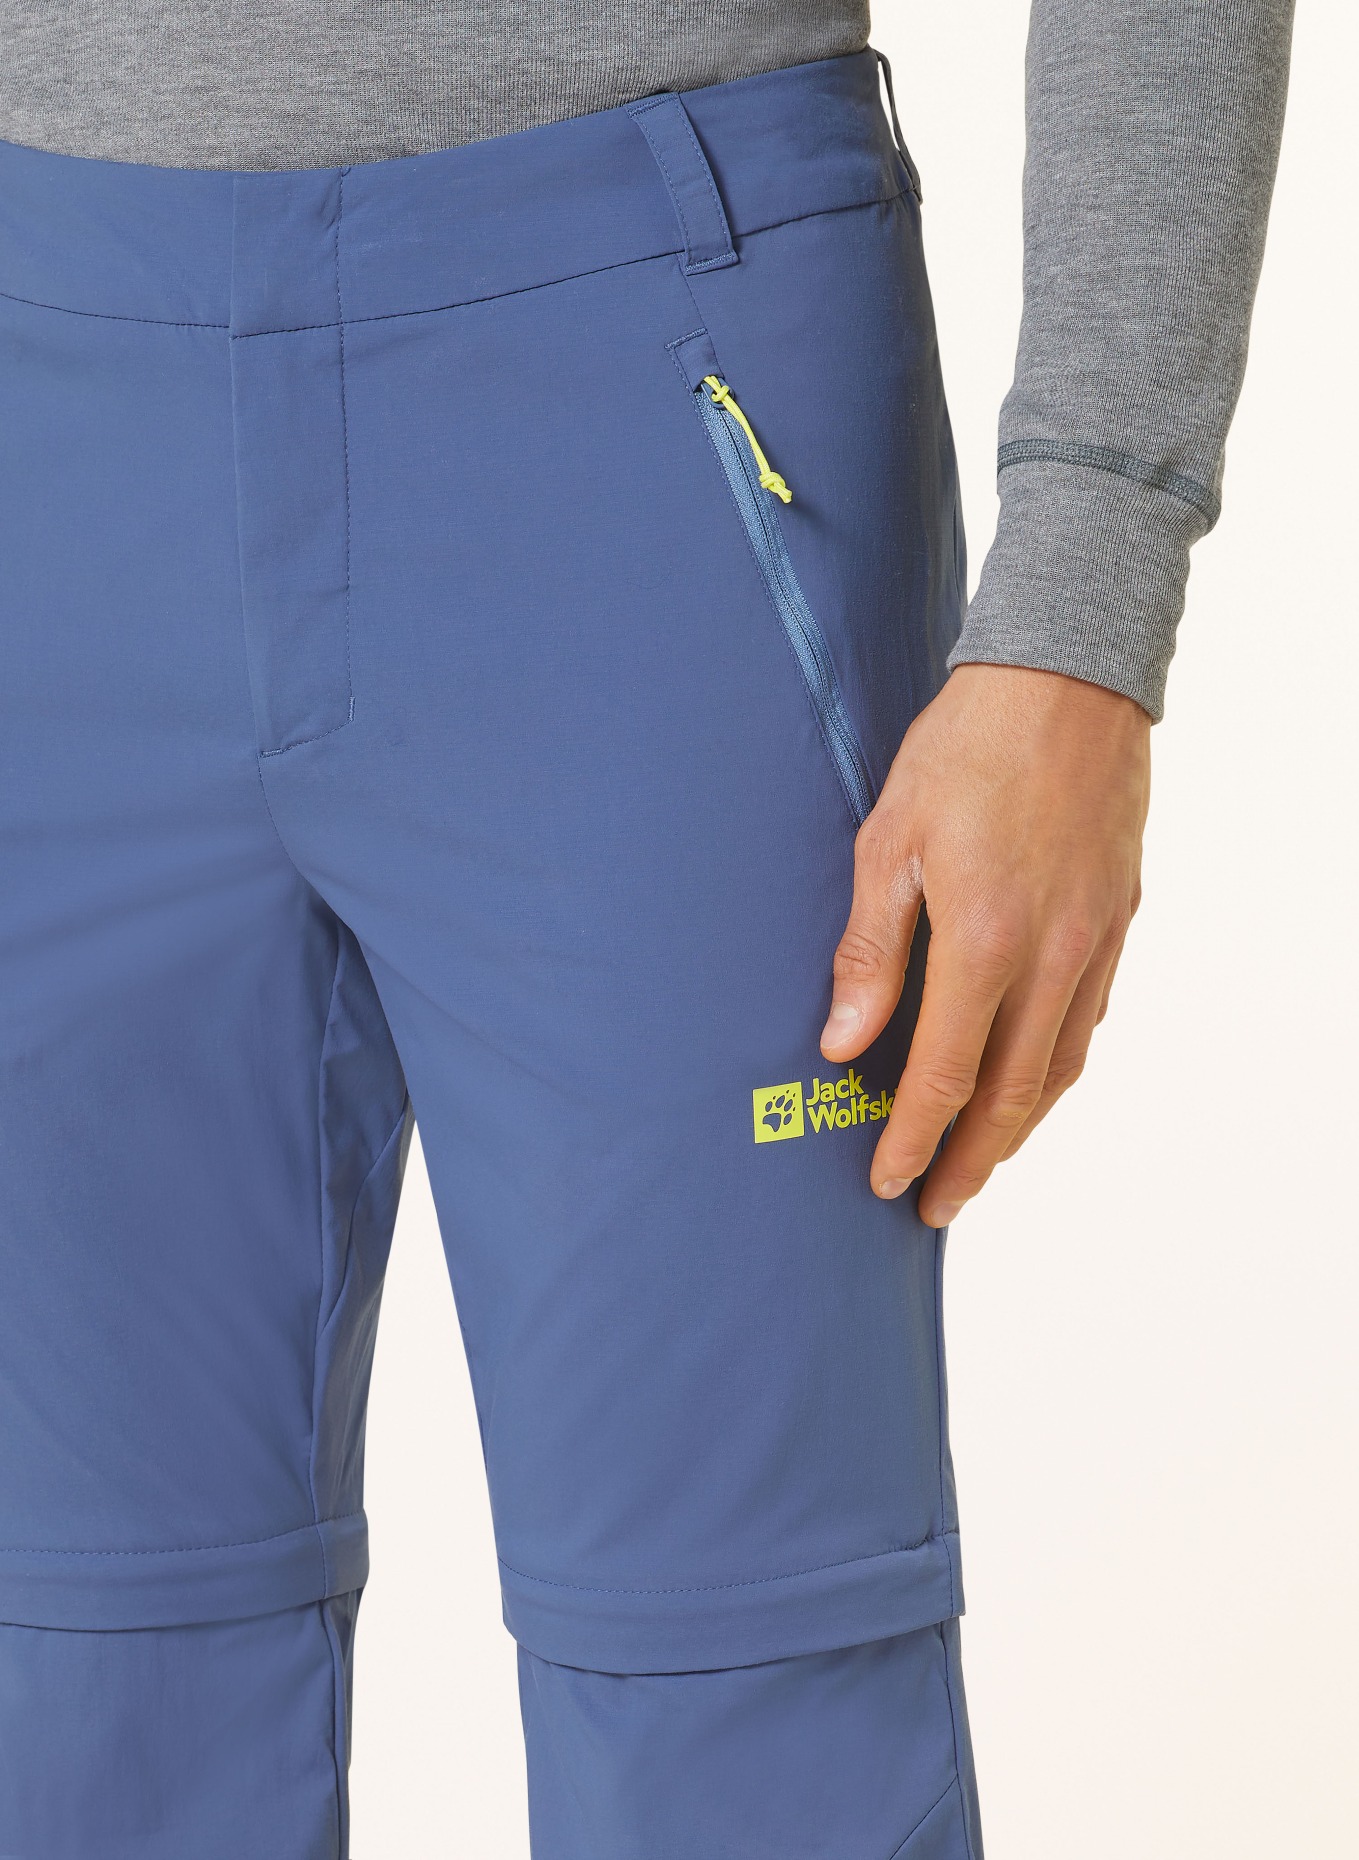 Jack Wolfskin Zip-off trousers GLASTAL, Color: BLUE/ NEON YELLOW (Image 6)